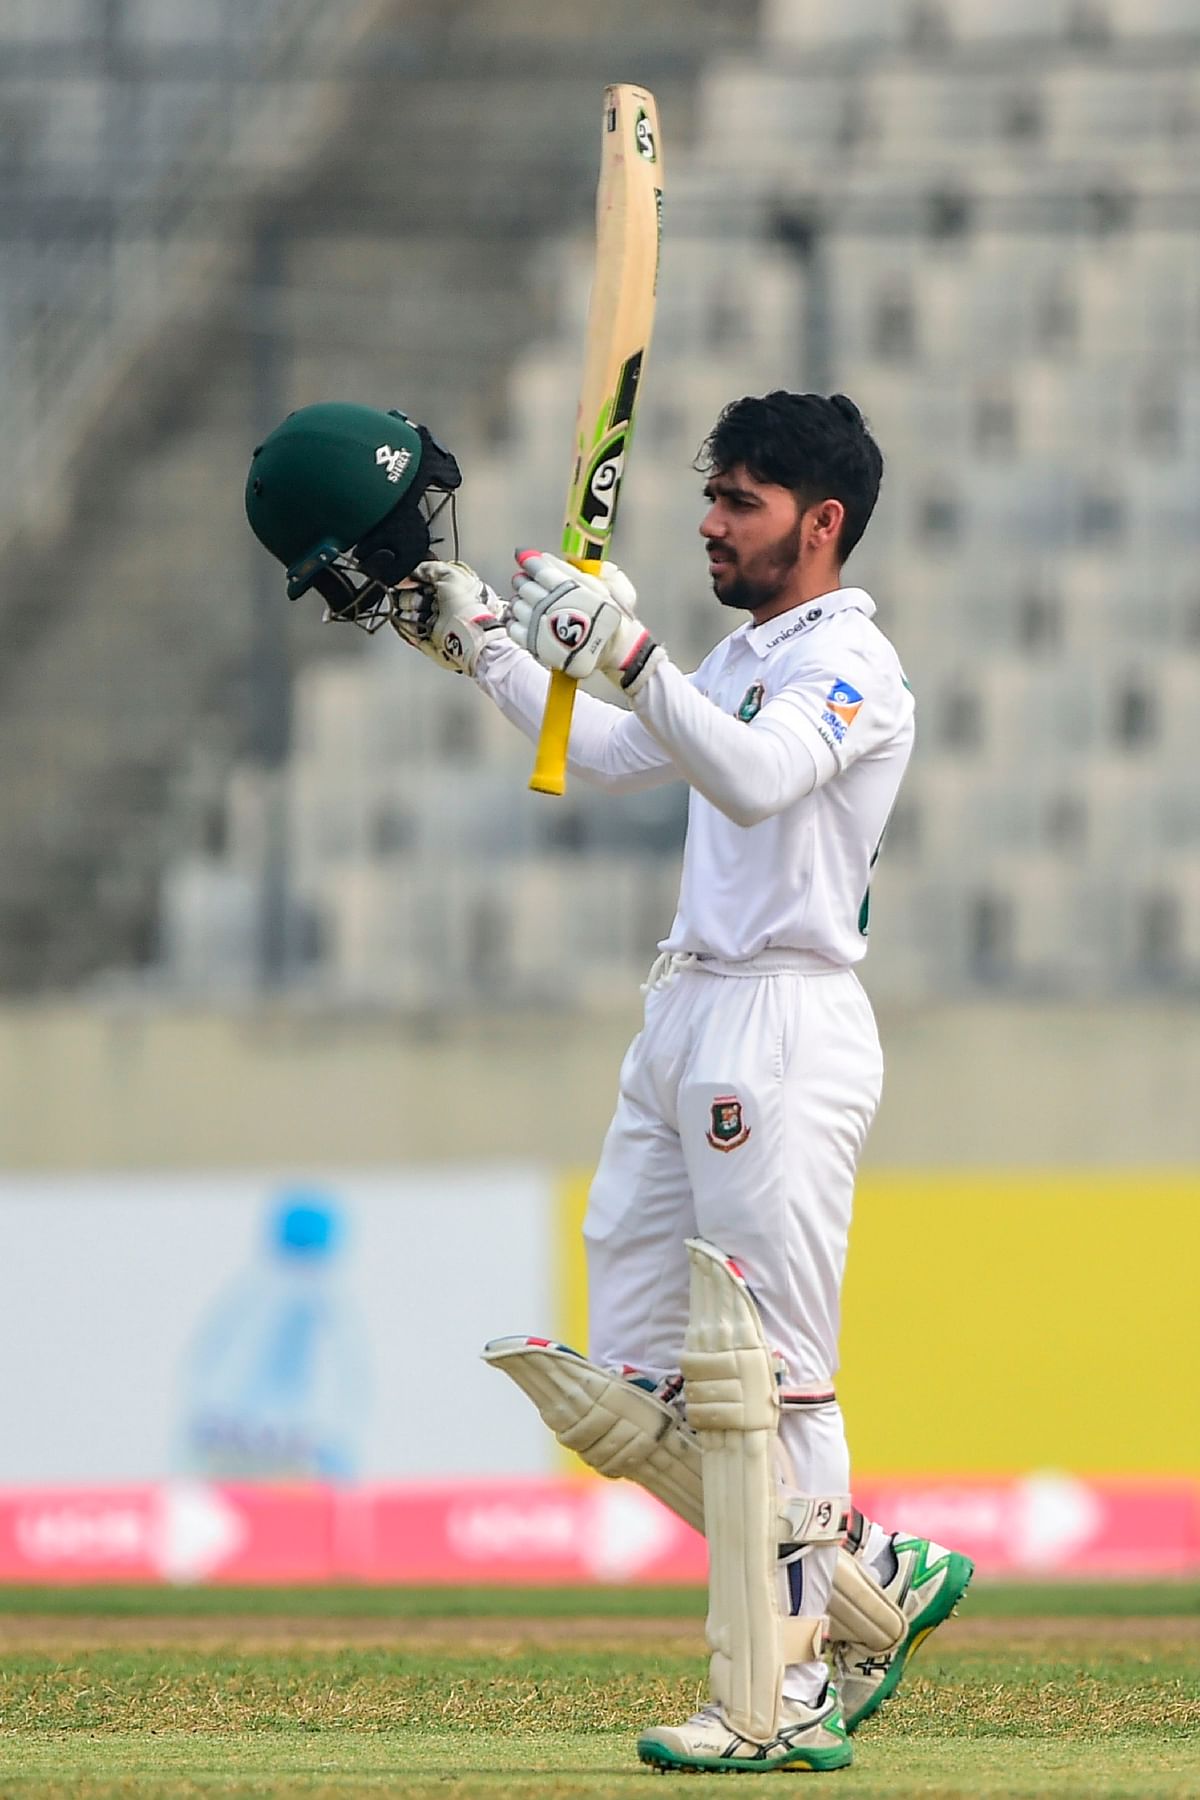 Bangladesh`s captain Mominul Haque rises his bat after scoring a century (100 runs) during the third day of a Test cricket match between Bangladesh and Zimbabwe at the Sher-e-Bangla National Cricket Stadium in Dhaka on 24 February, 2020. Photo: AFP